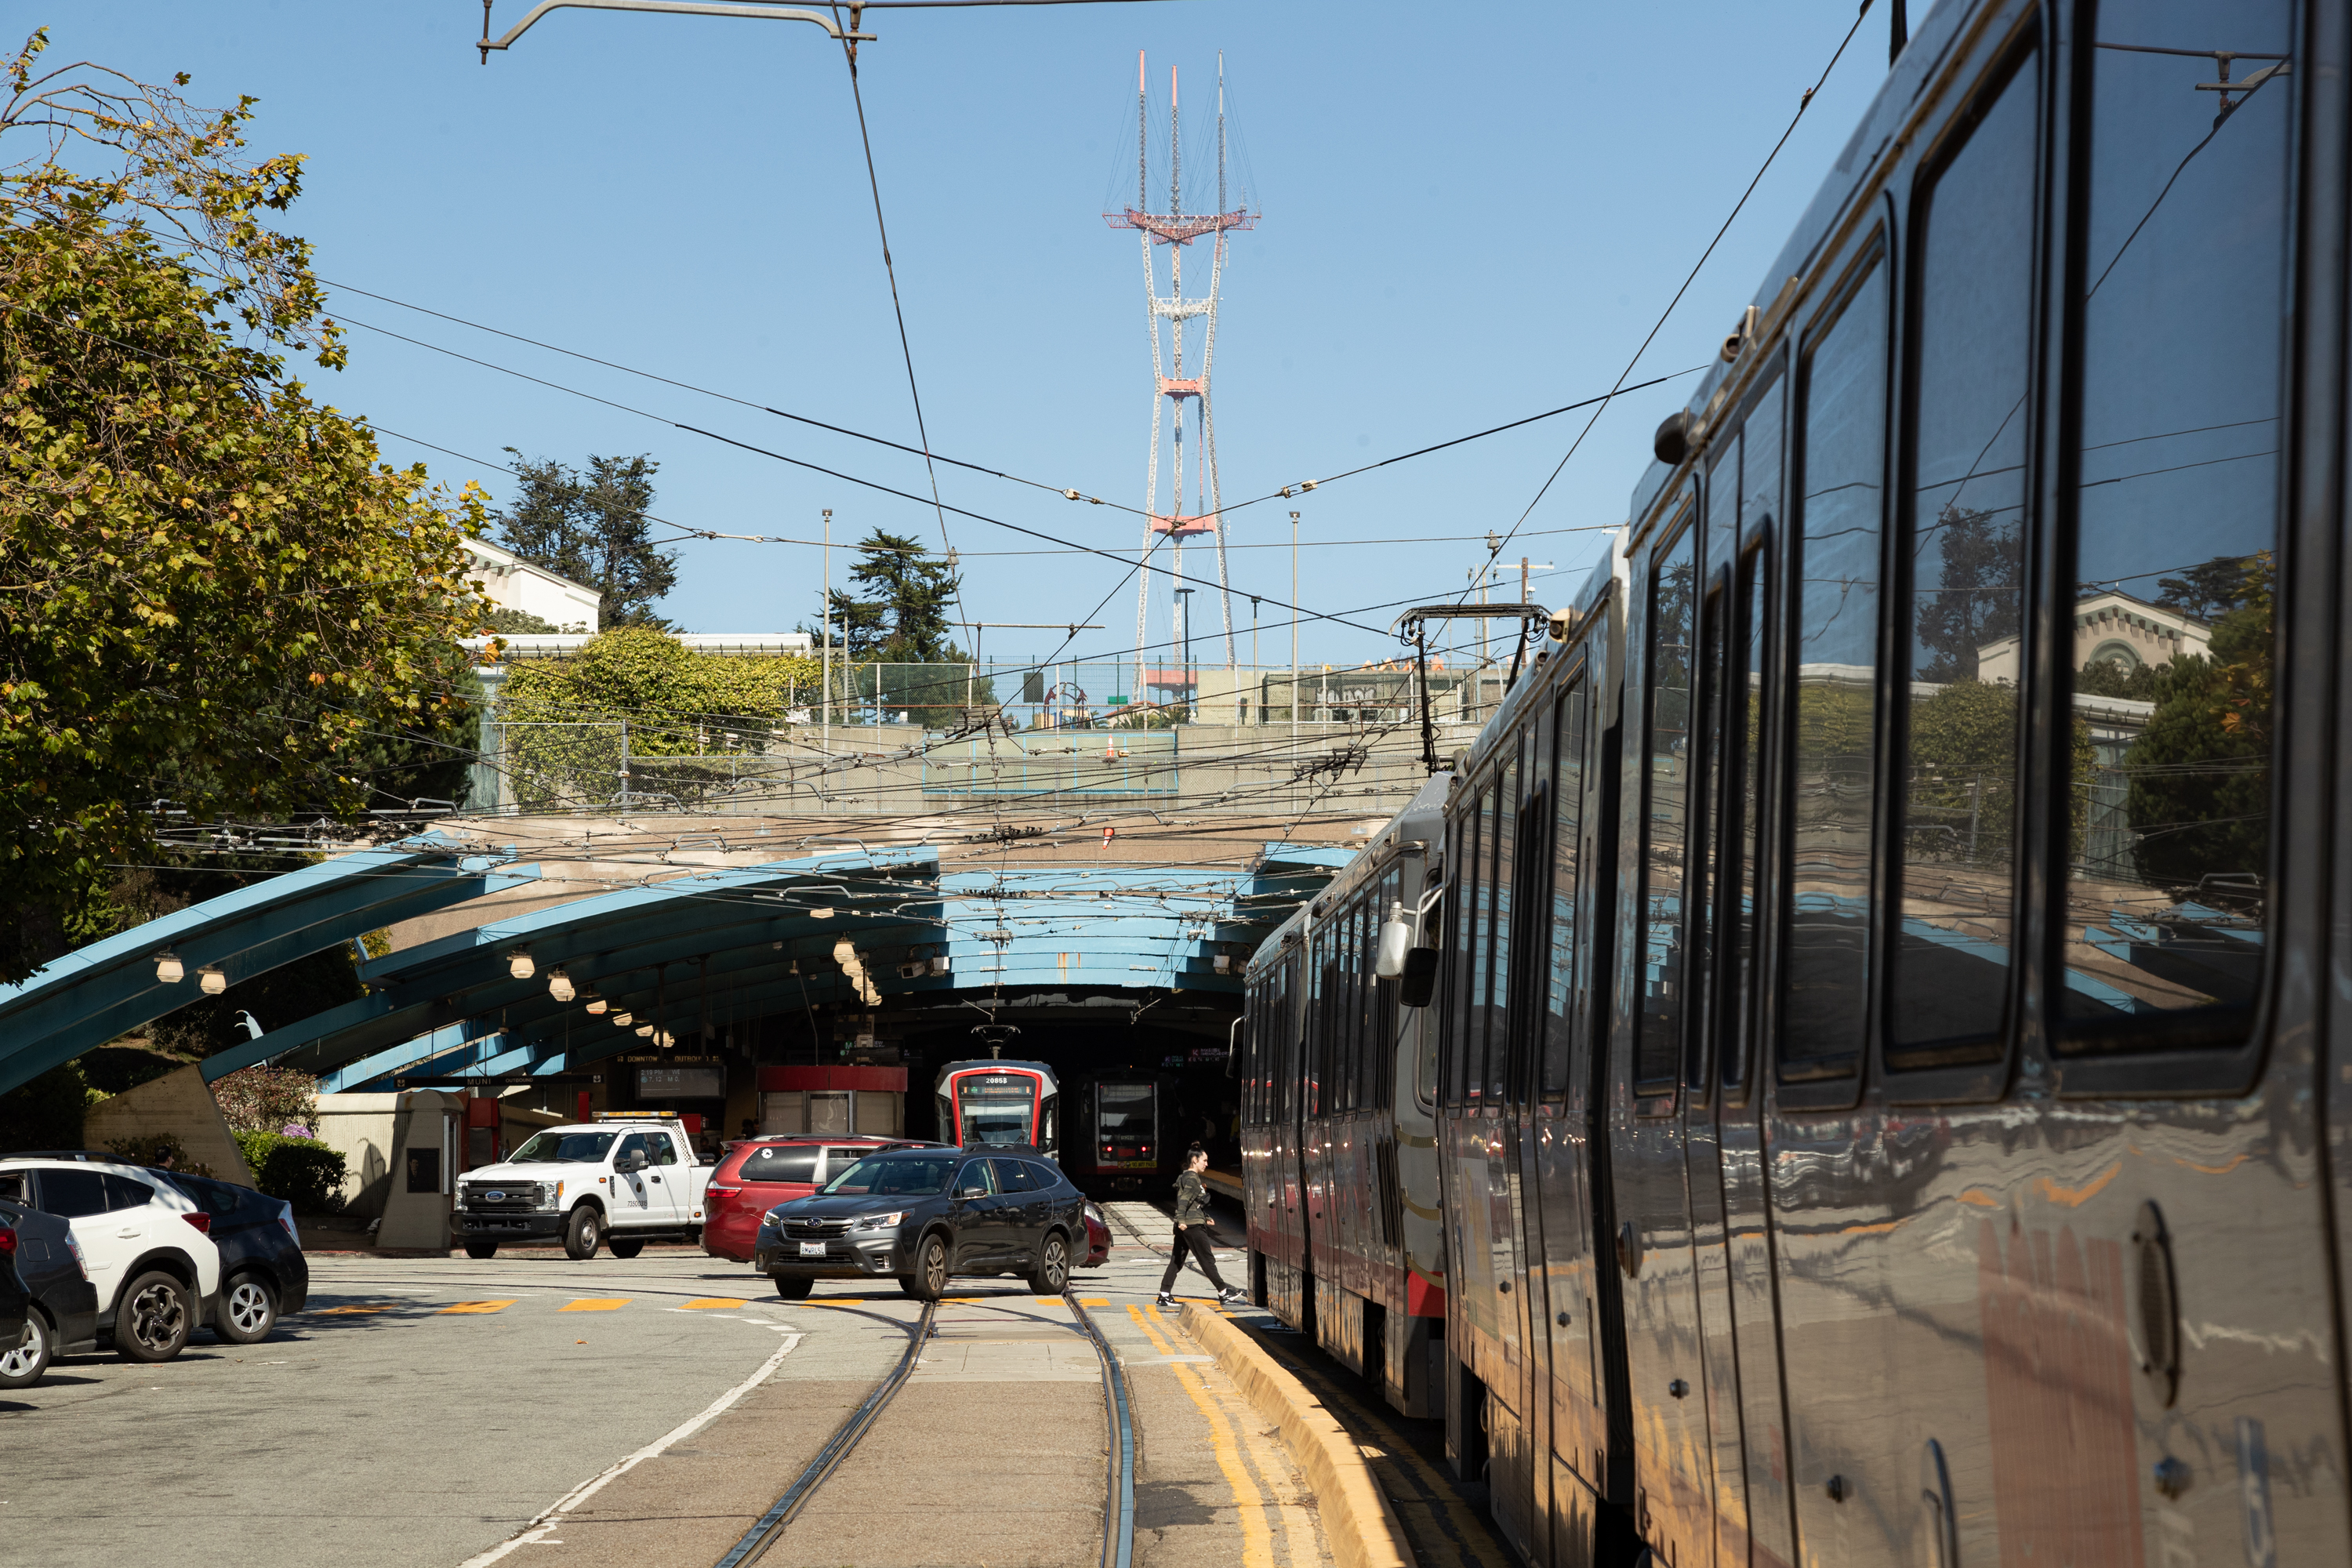 San Francisco transit officials have shut down two westside Muni stations Friday evening due to a power outage affecting thousands of customers.